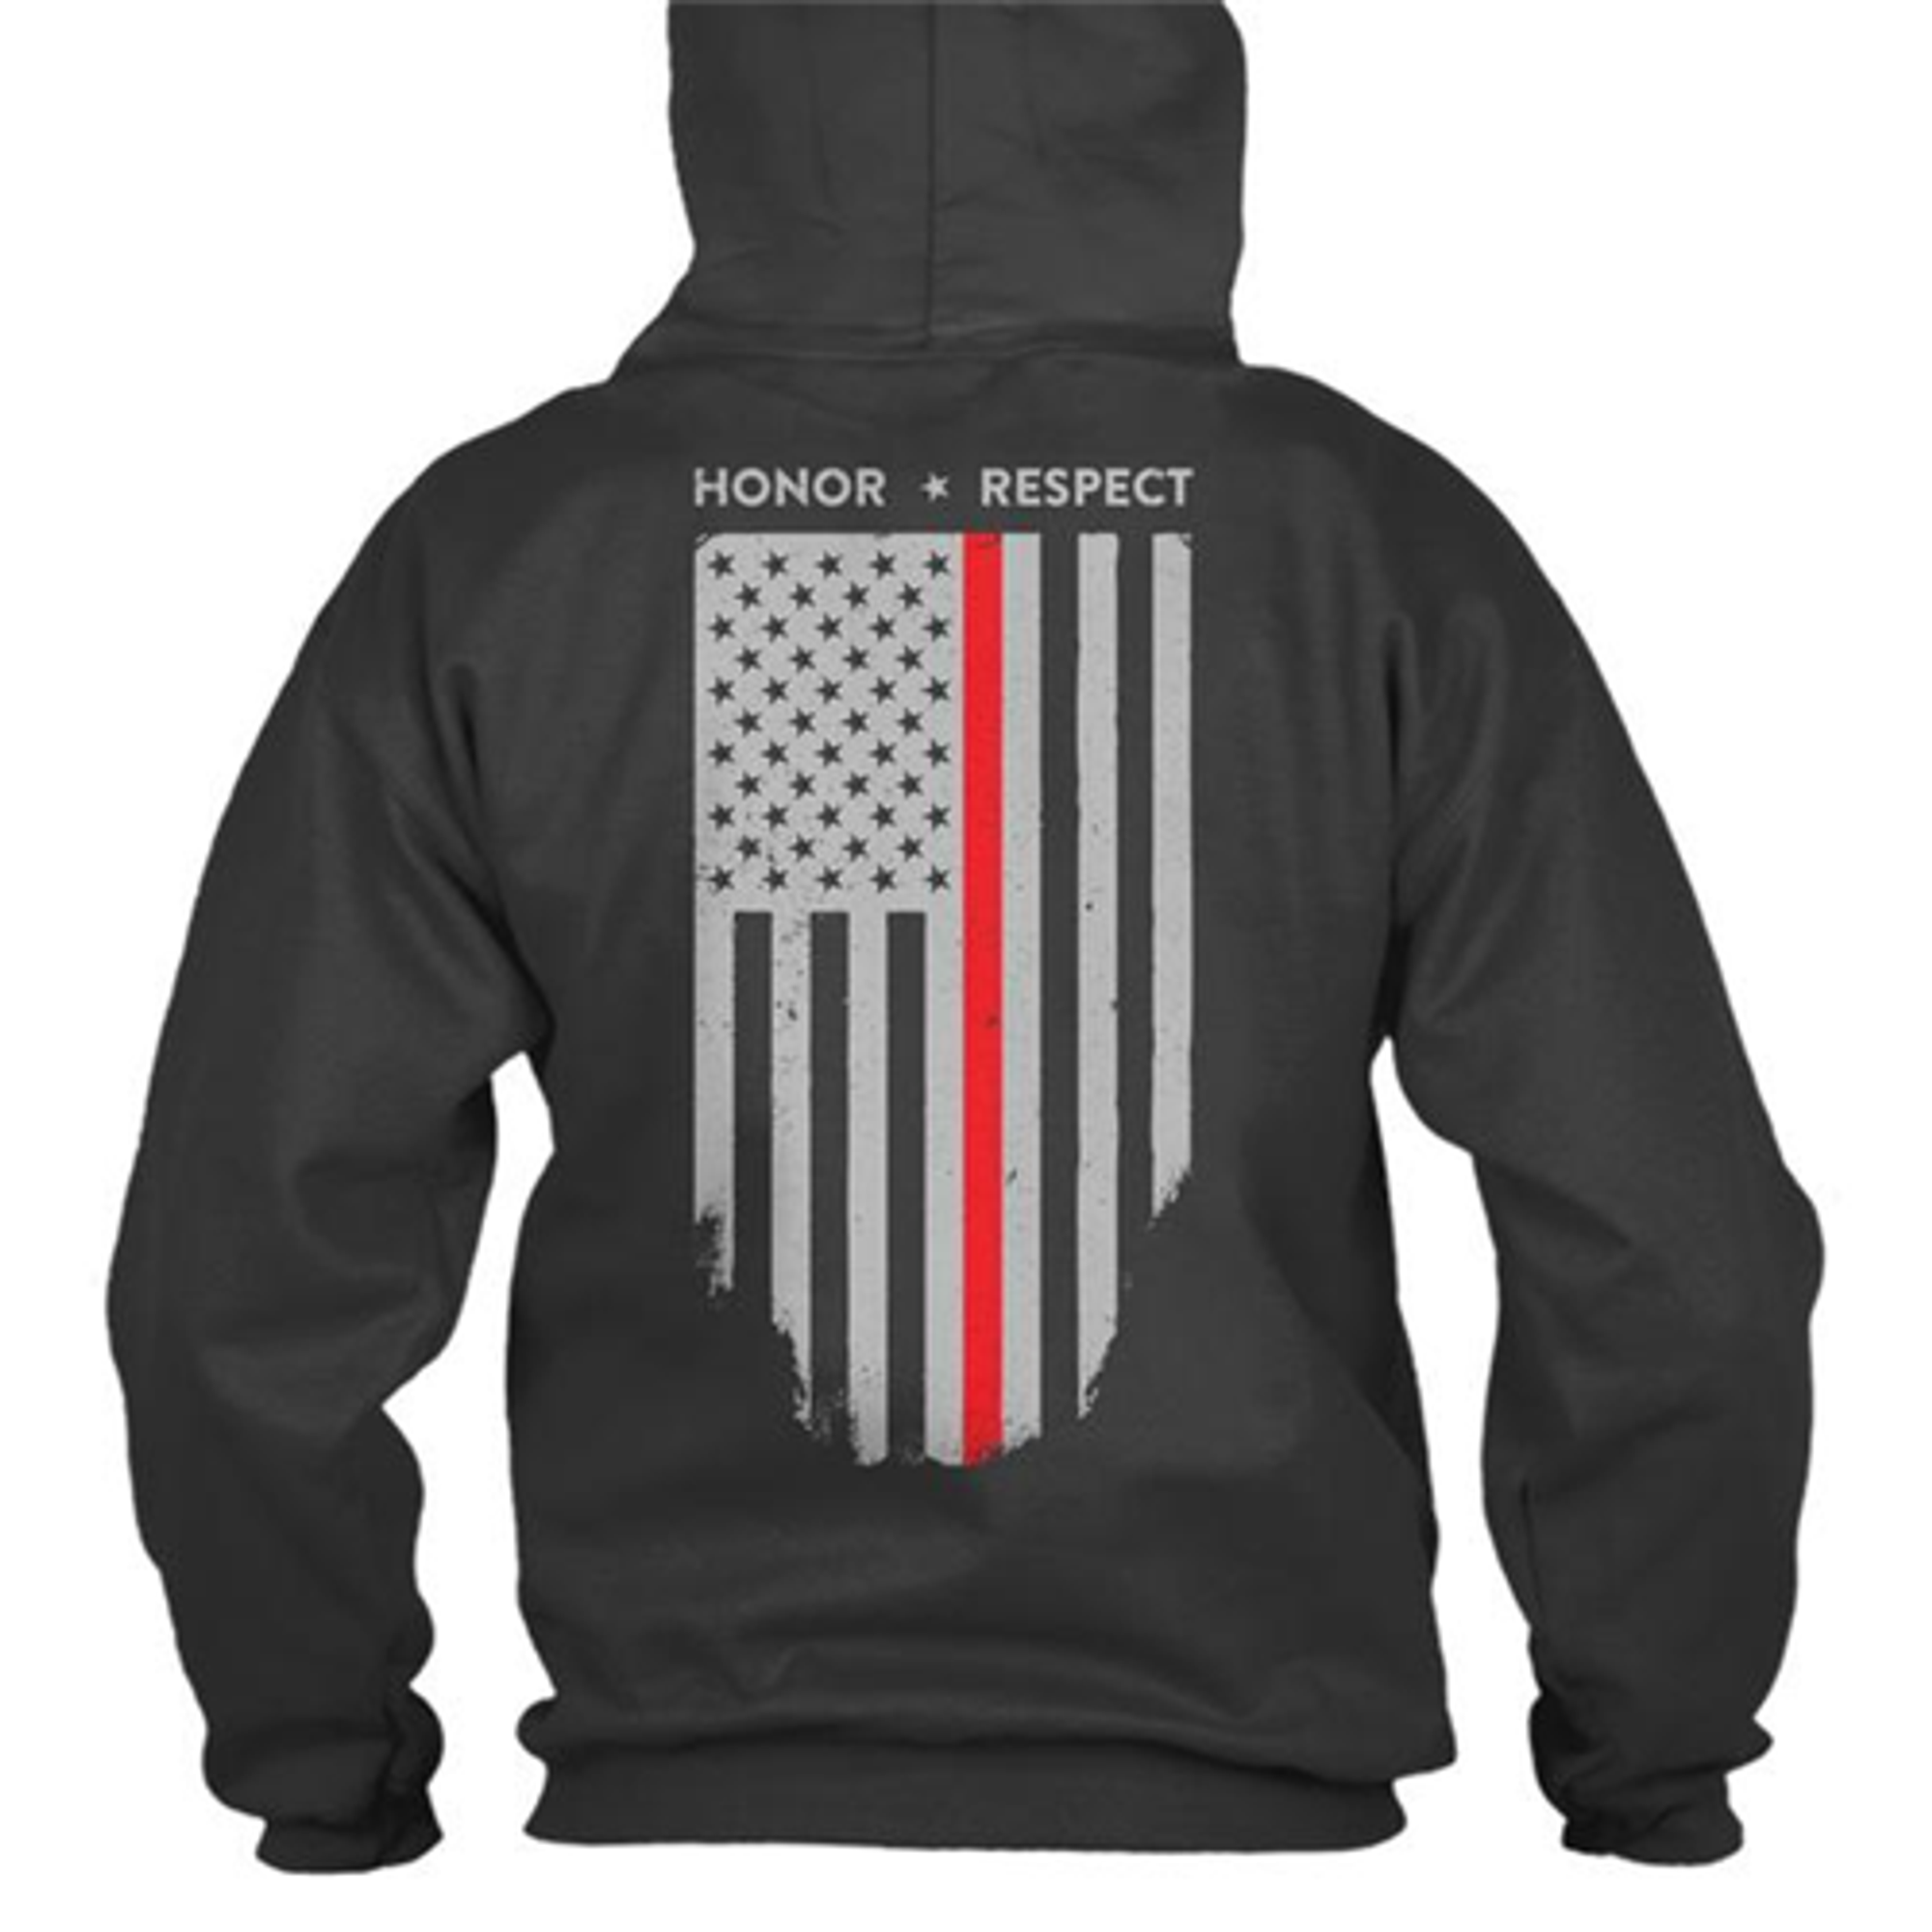 Hoodie - Thin Red Line American Flag Honor & Respect